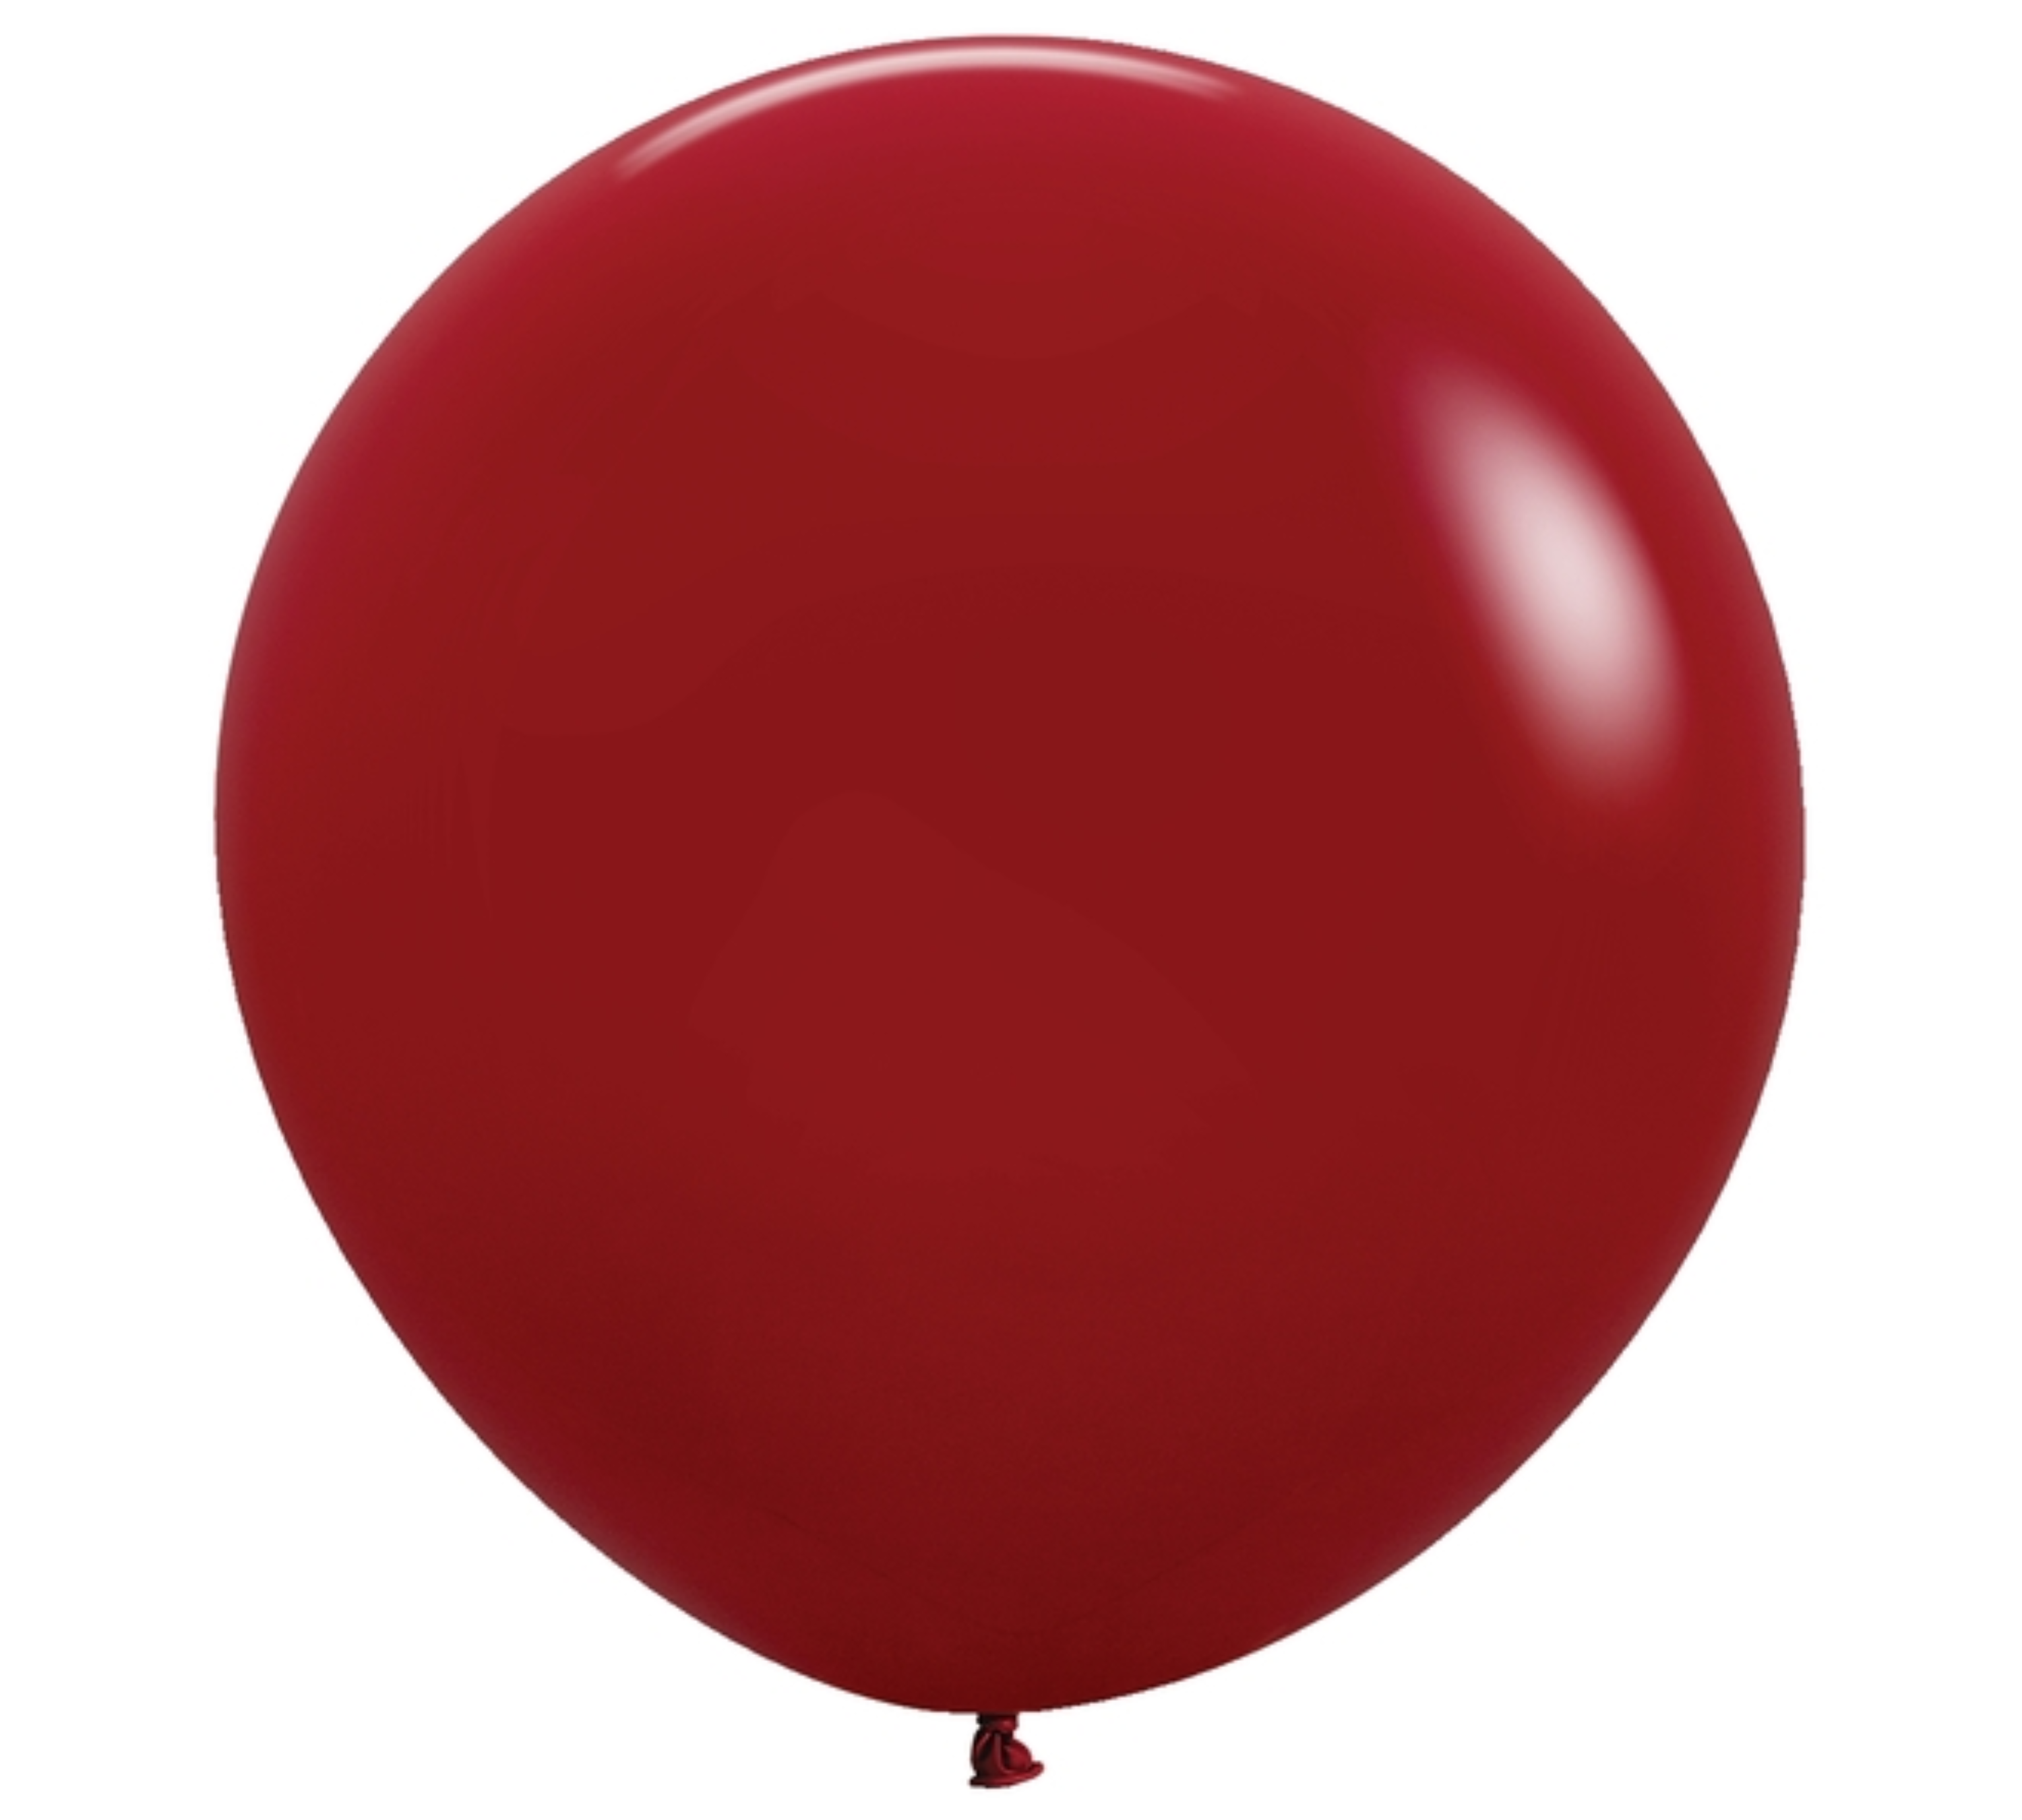 24" Sempertex Deluxe Imperial Red Latex Balloons | 10 Count